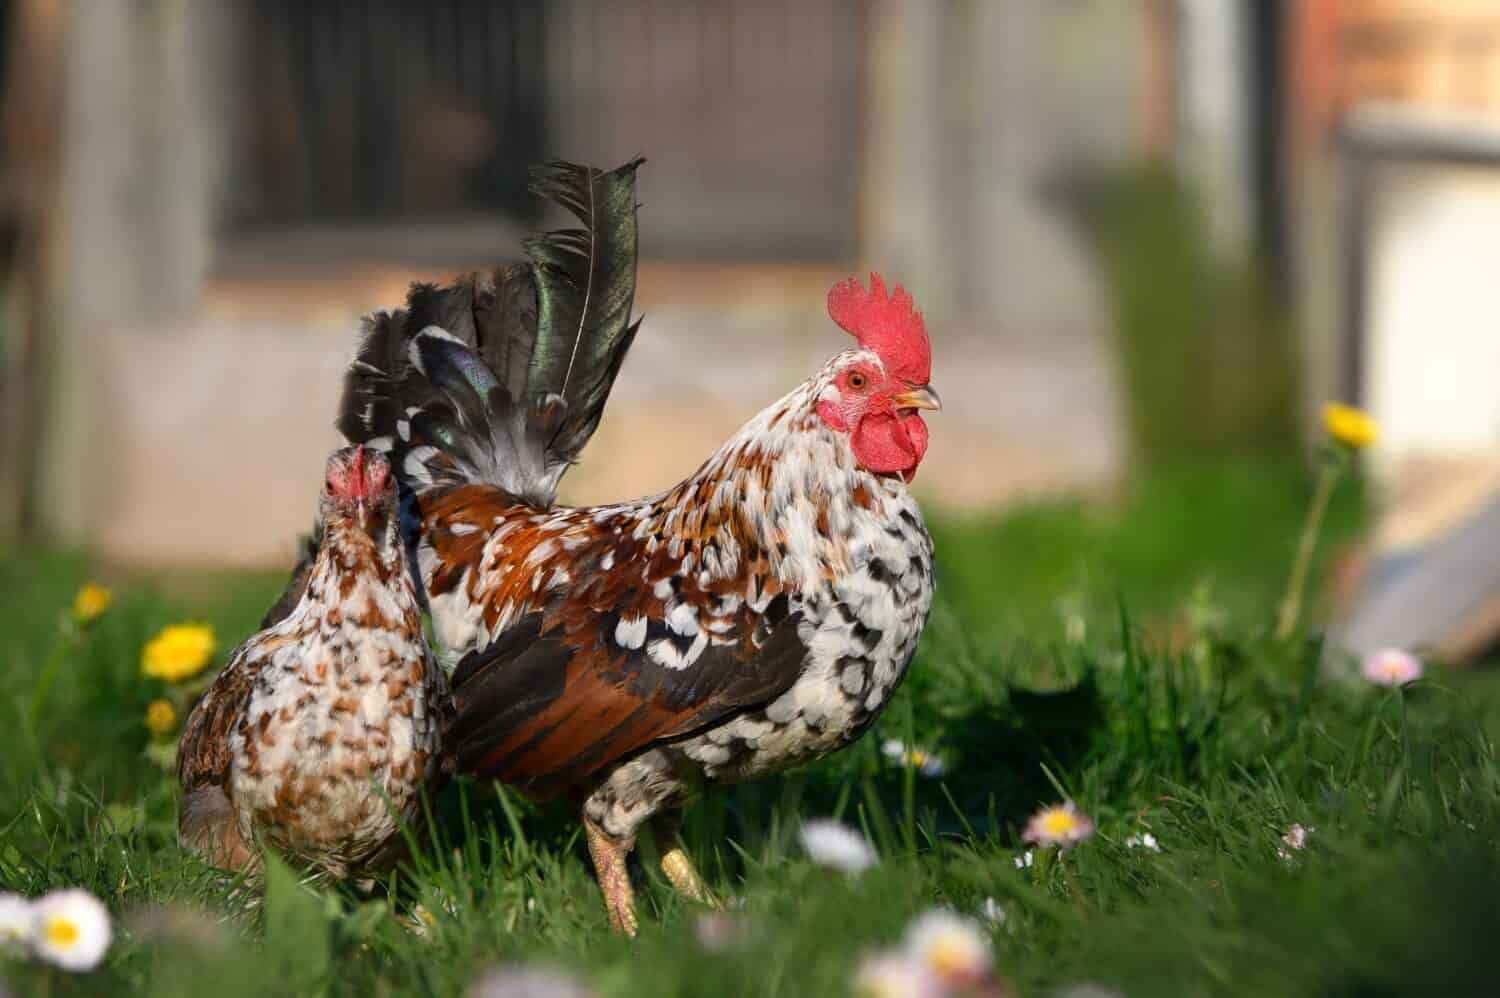 dwarf chickens posing outdoors on grass in warm spring sun